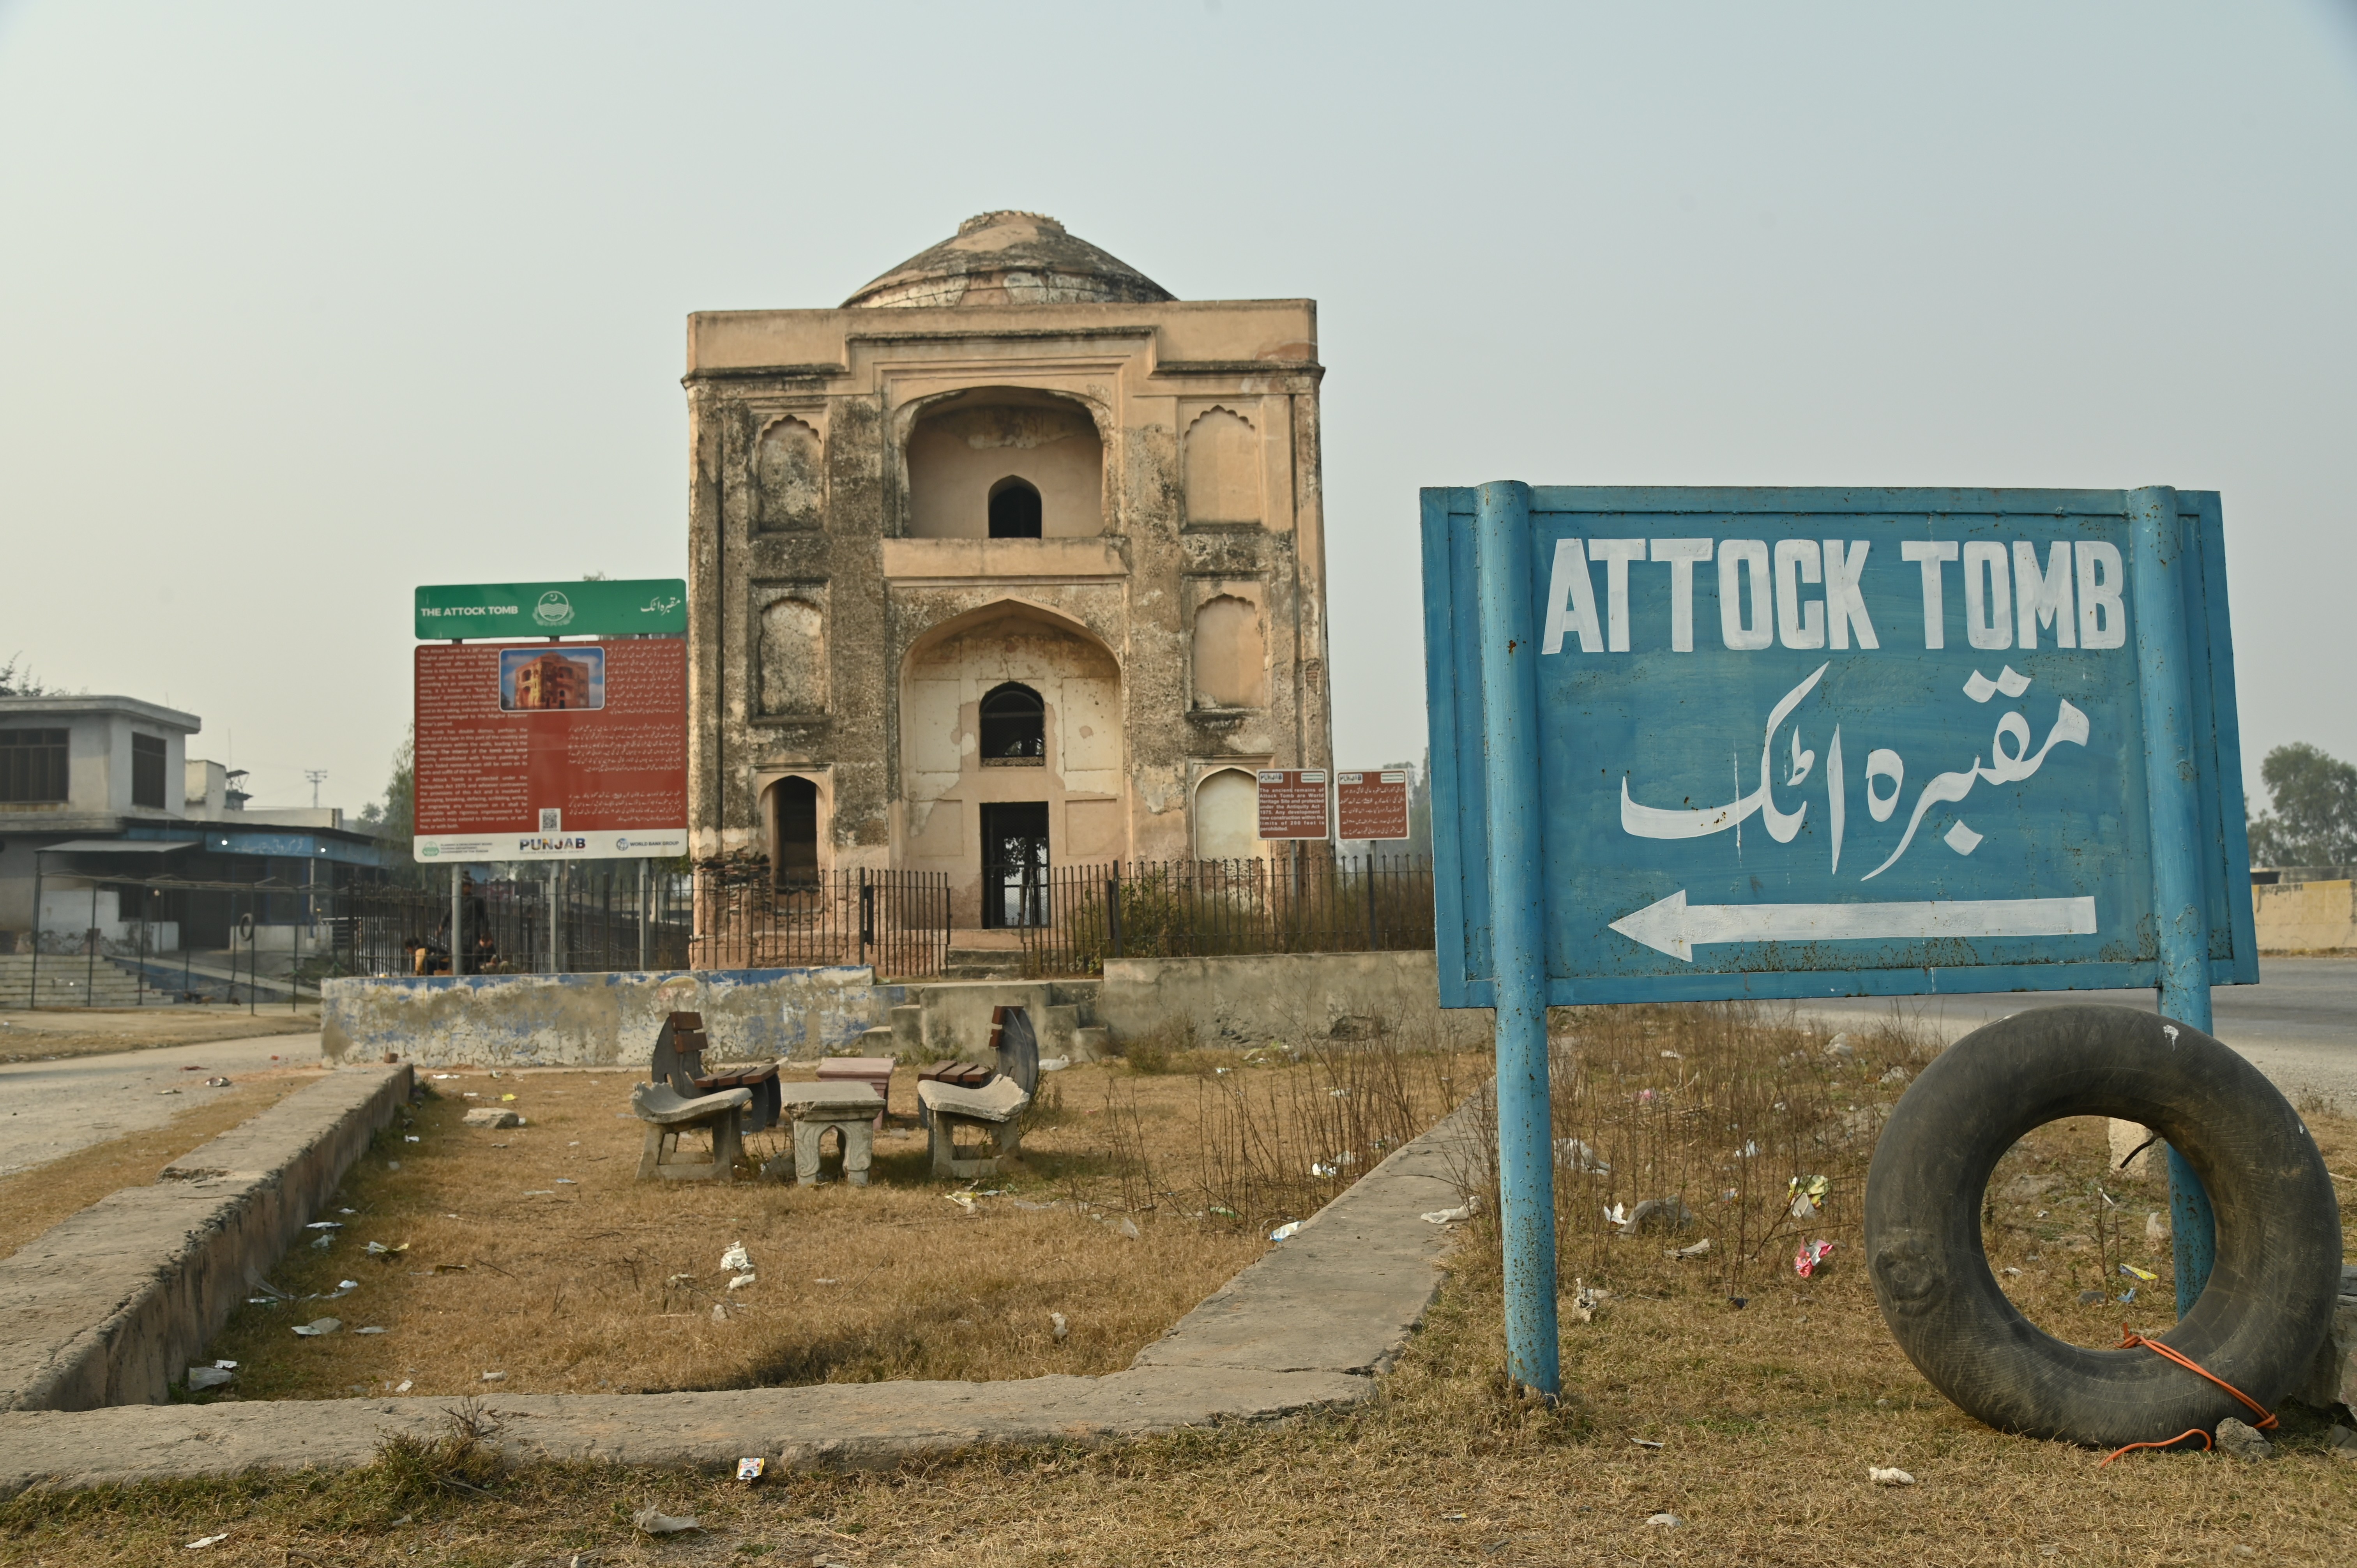 The direction board indicates the direction of The Attock Fort